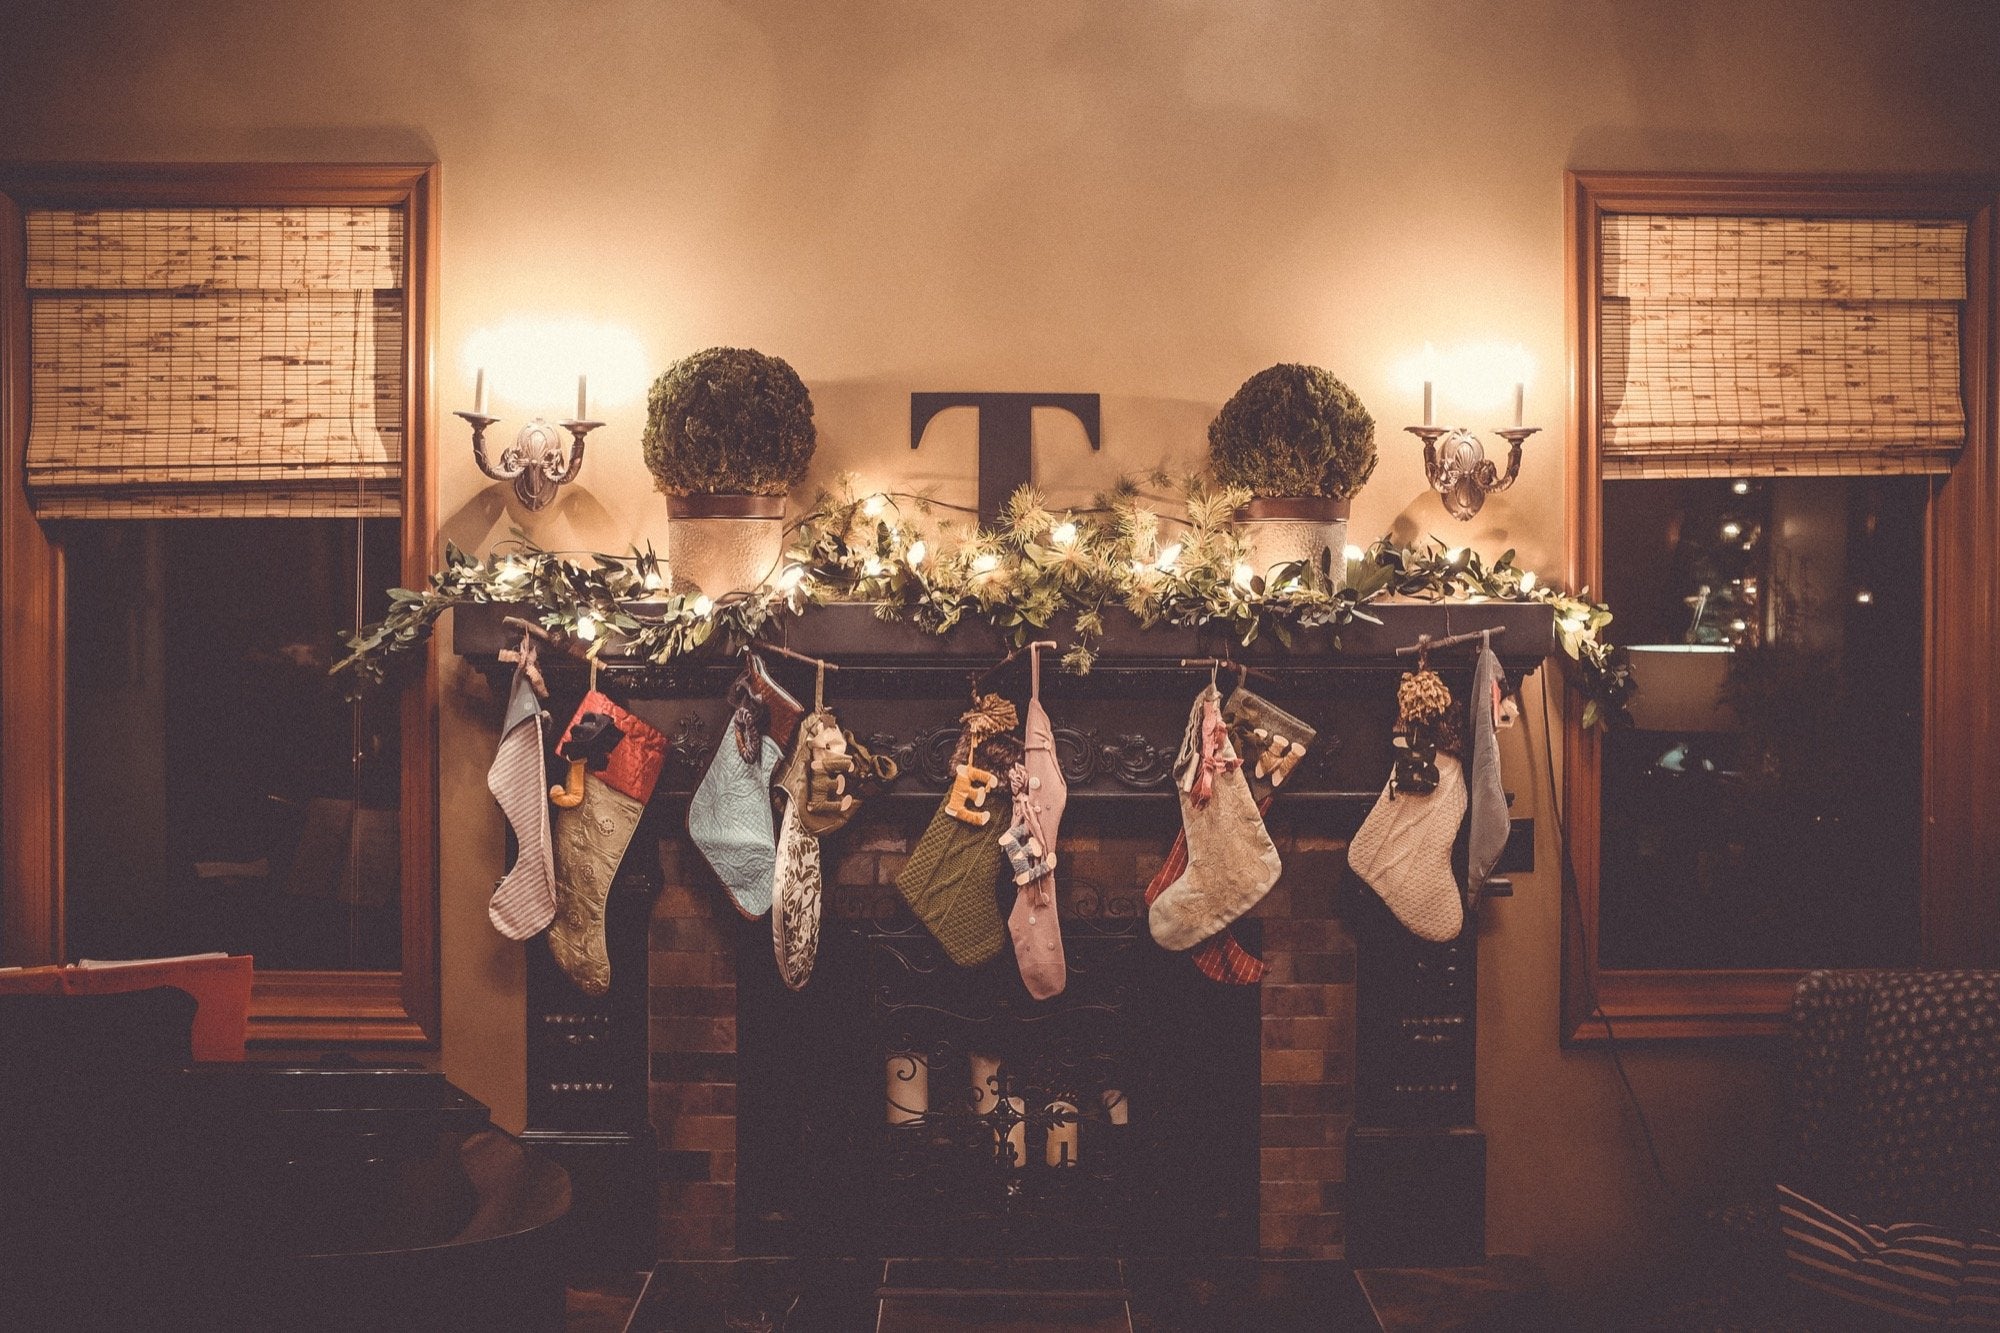 Wait, Why Do We Hang Christmas Stockings? (Plus 24 Little Gift Ideas)